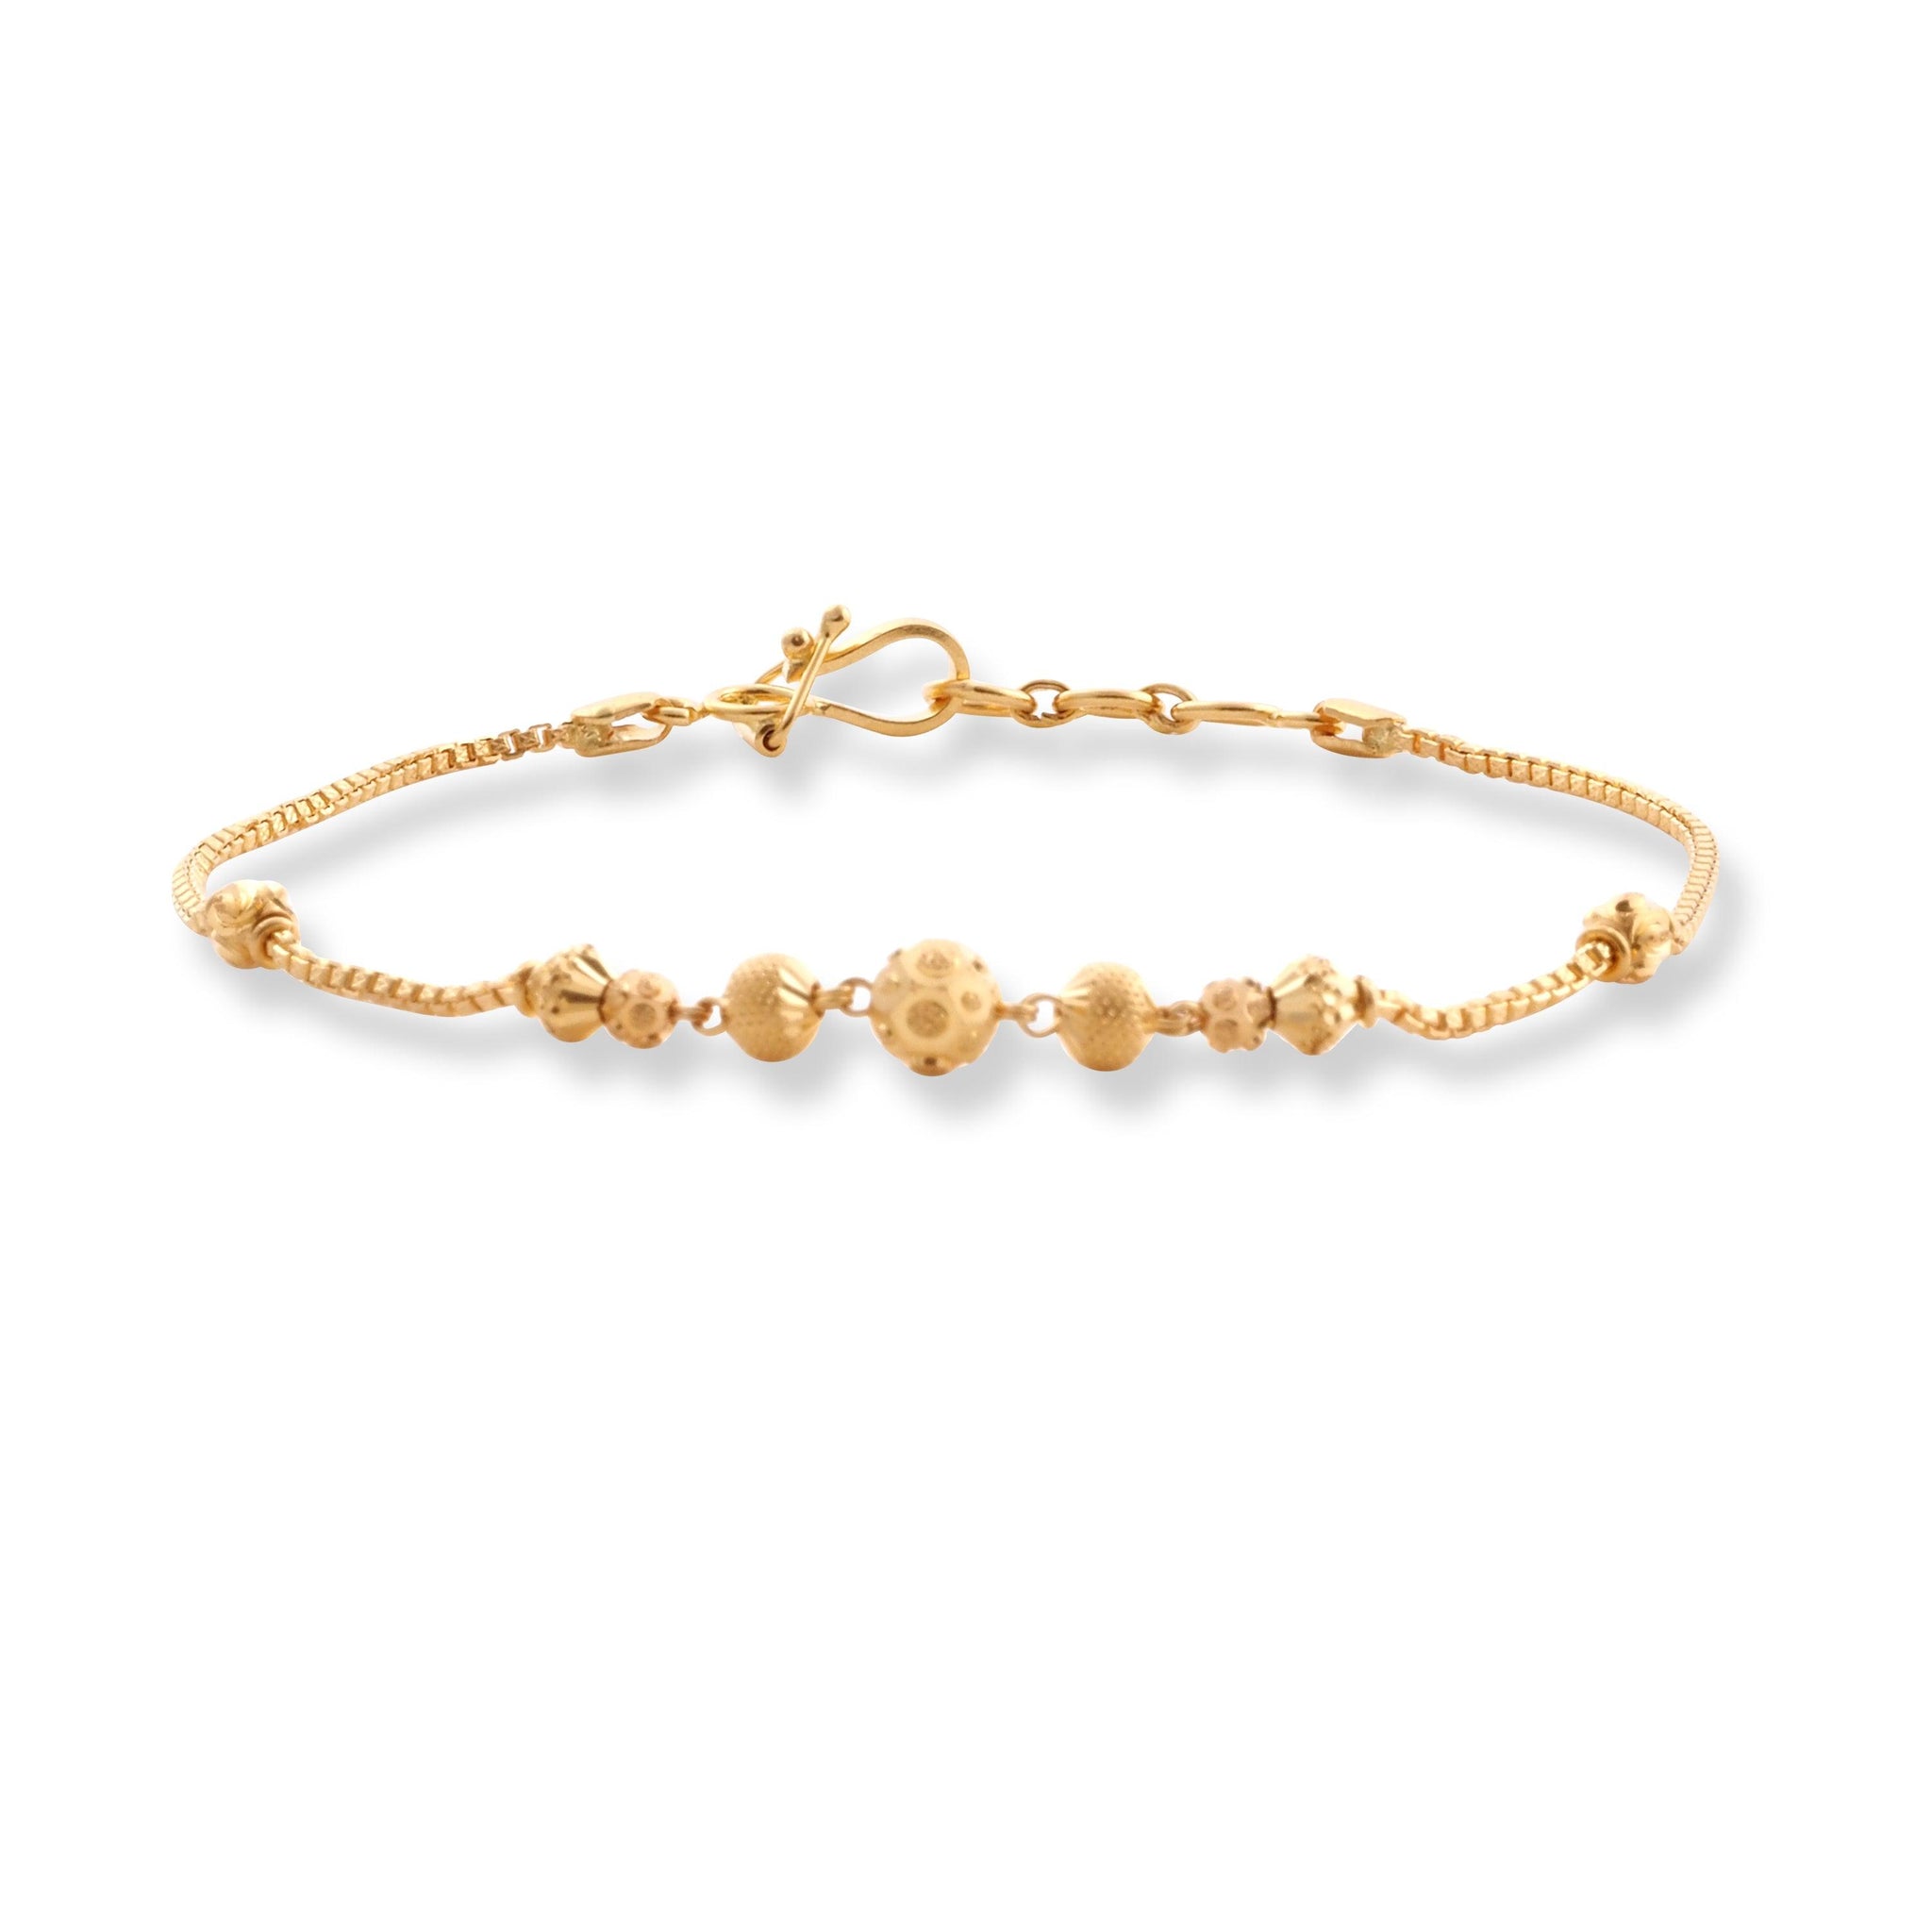 22ct Gold Bracelet with Diamond Cut Beads and Hook Clasp LBR-8512